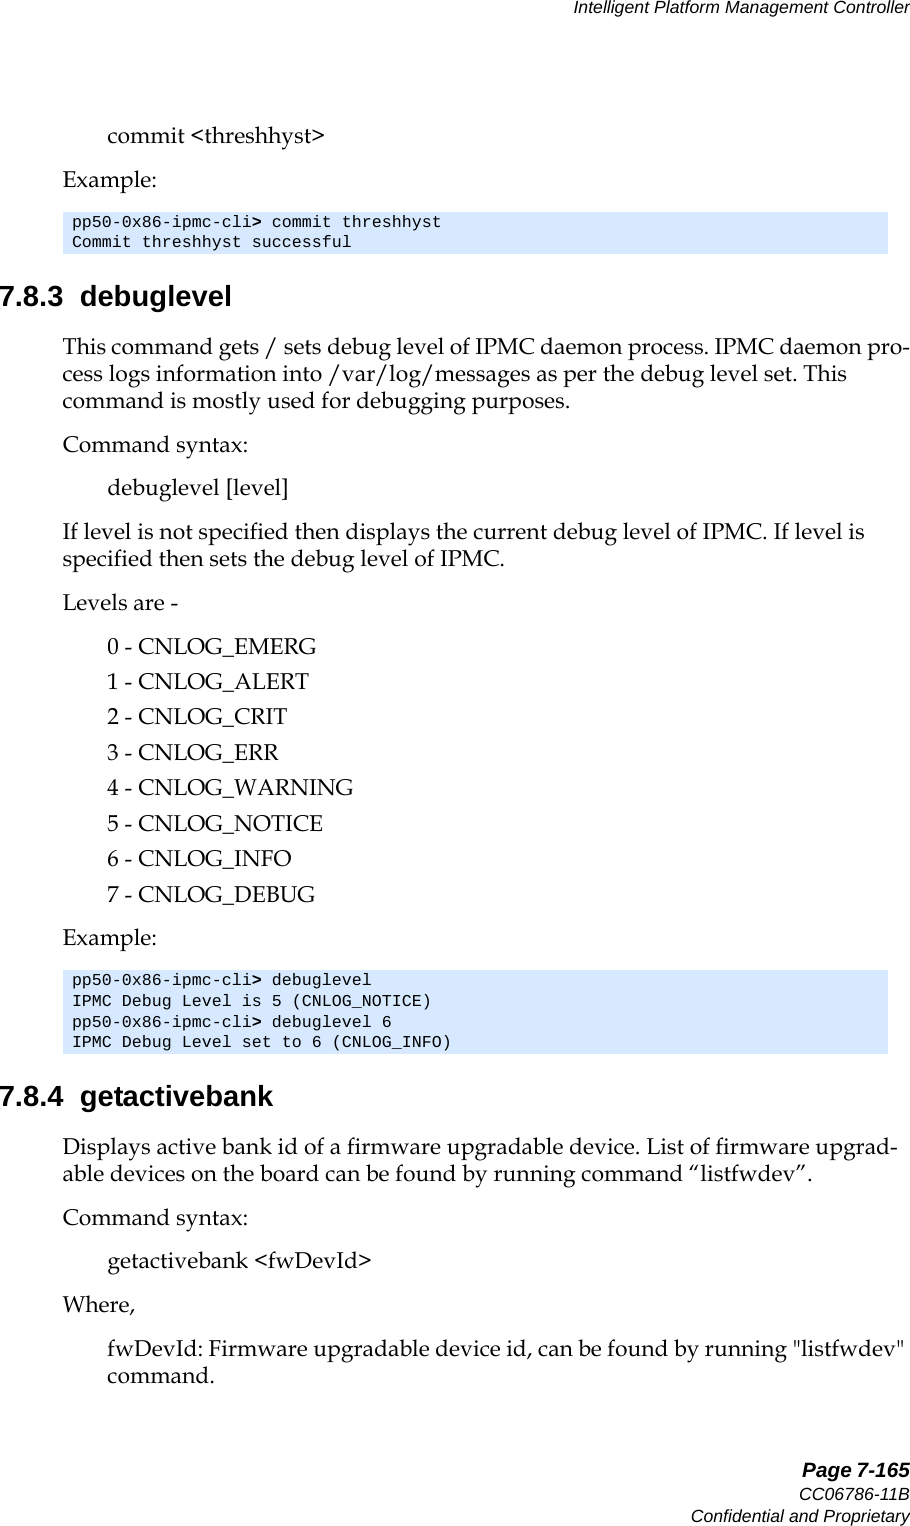   Page 7-165CC06786-11BConfidential and ProprietaryIntelligent Platform Management Controller14ABABPreliminarycommit &lt;threshhyst&gt;Example:7.8.3  debuglevelThis command gets / sets debug level of IPMC daemon process. IPMC daemon pro-cess logs information into /var/log/messages as per the debug level set. This command is mostly used for debugging purposes. Command syntax:debuglevel [level]If level is not specified then displays the current debug level of IPMC. If level is specified then sets the debug level of IPMC.Levels are - 0 - CNLOG_EMERG1 - CNLOG_ALERT2 - CNLOG_CRIT3 - CNLOG_ERR4 - CNLOG_WARNING5 - CNLOG_NOTICE6 - CNLOG_INFO7 - CNLOG_DEBUGExample:7.8.4  getactivebankDisplays active bank id of a firmware upgradable device. List of firmware upgrad-able devices on the board can be found by running command “listfwdev”.Command syntax:getactivebank &lt;fwDevId&gt;Where,fwDevId: Firmware upgradable device id, can be found by running &quot;listfwdev&quot; command.pp50-0x86-ipmc-cli&gt; commit threshhystCommit threshhyst successfulpp50-0x86-ipmc-cli&gt; debuglevelIPMC Debug Level is 5 (CNLOG_NOTICE)pp50-0x86-ipmc-cli&gt; debuglevel 6IPMC Debug Level set to 6 (CNLOG_INFO)